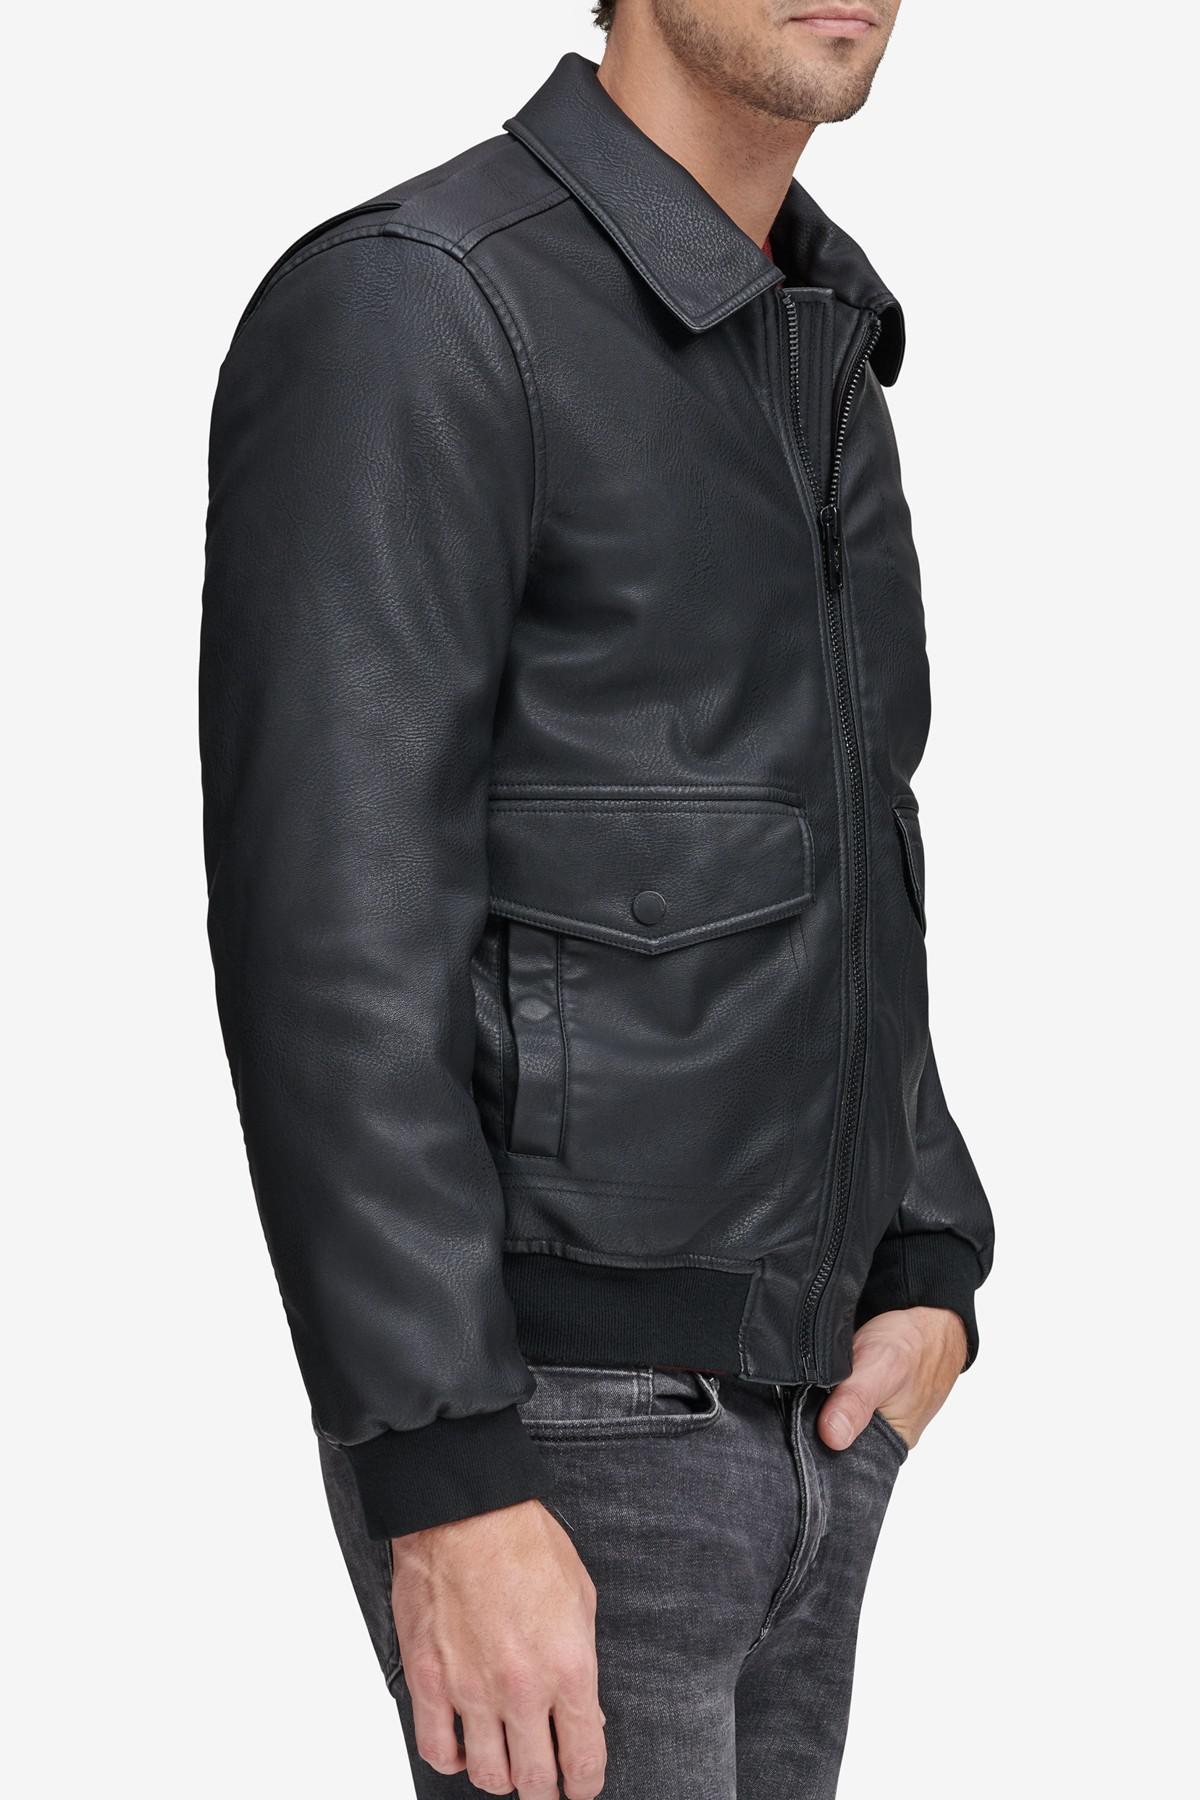 Andrew Marc Westerly Faux Leather Bomber Jacket in Black for Men - Lyst